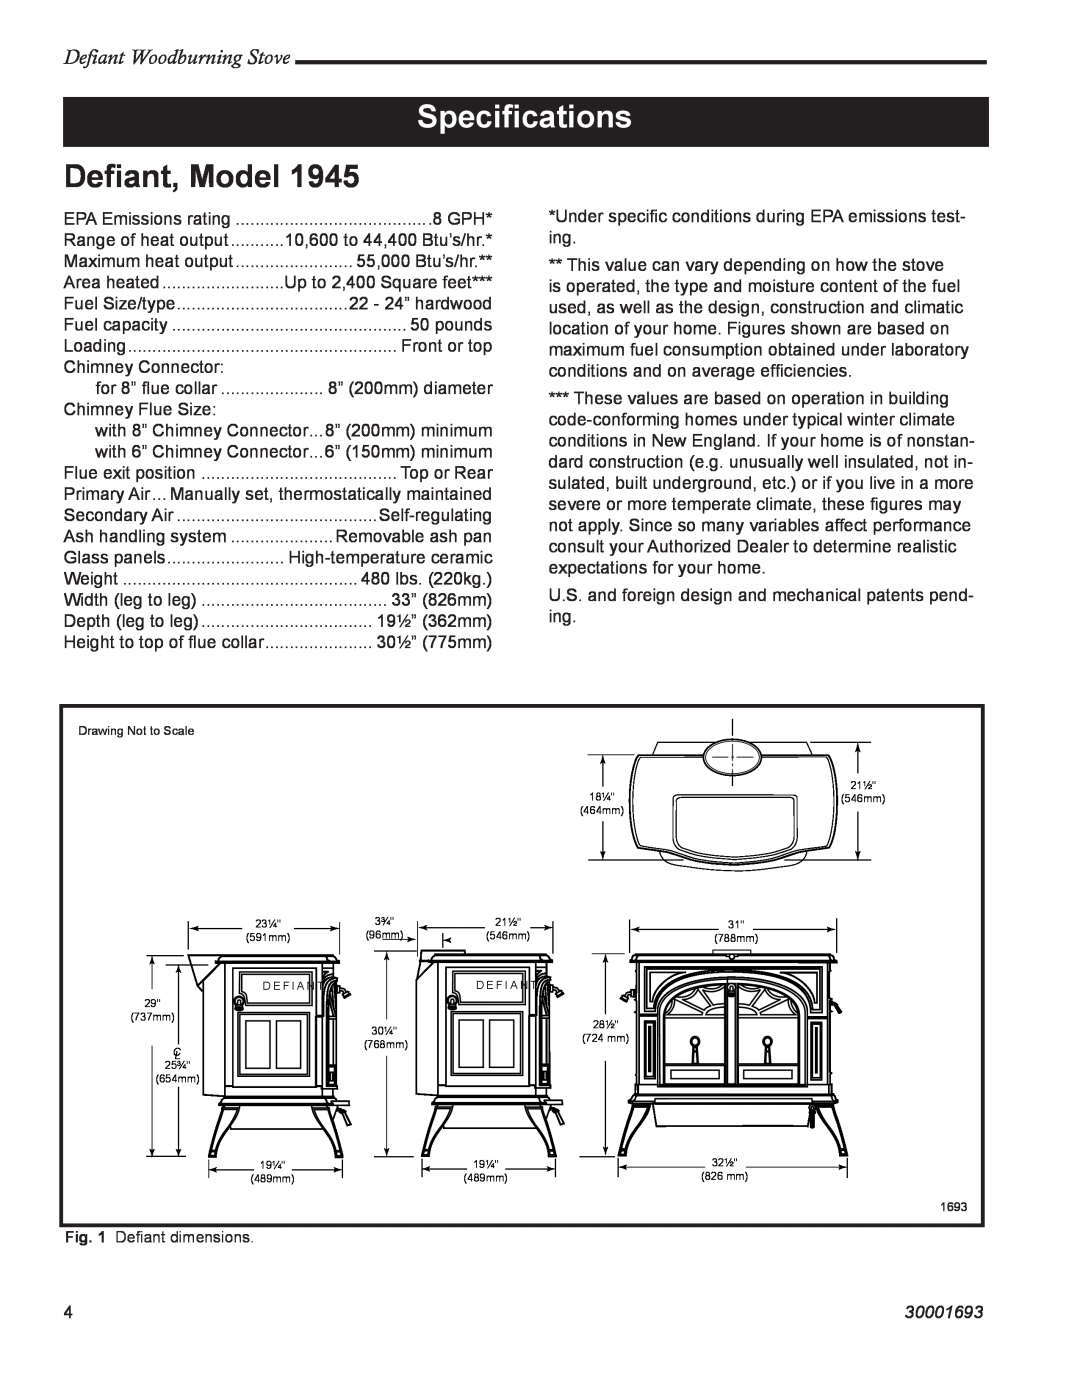 Vermont Casting 1945 installation instructions Speciﬁcations, Deﬁant, Model, Defiant Woodburning Stove, 30001693 